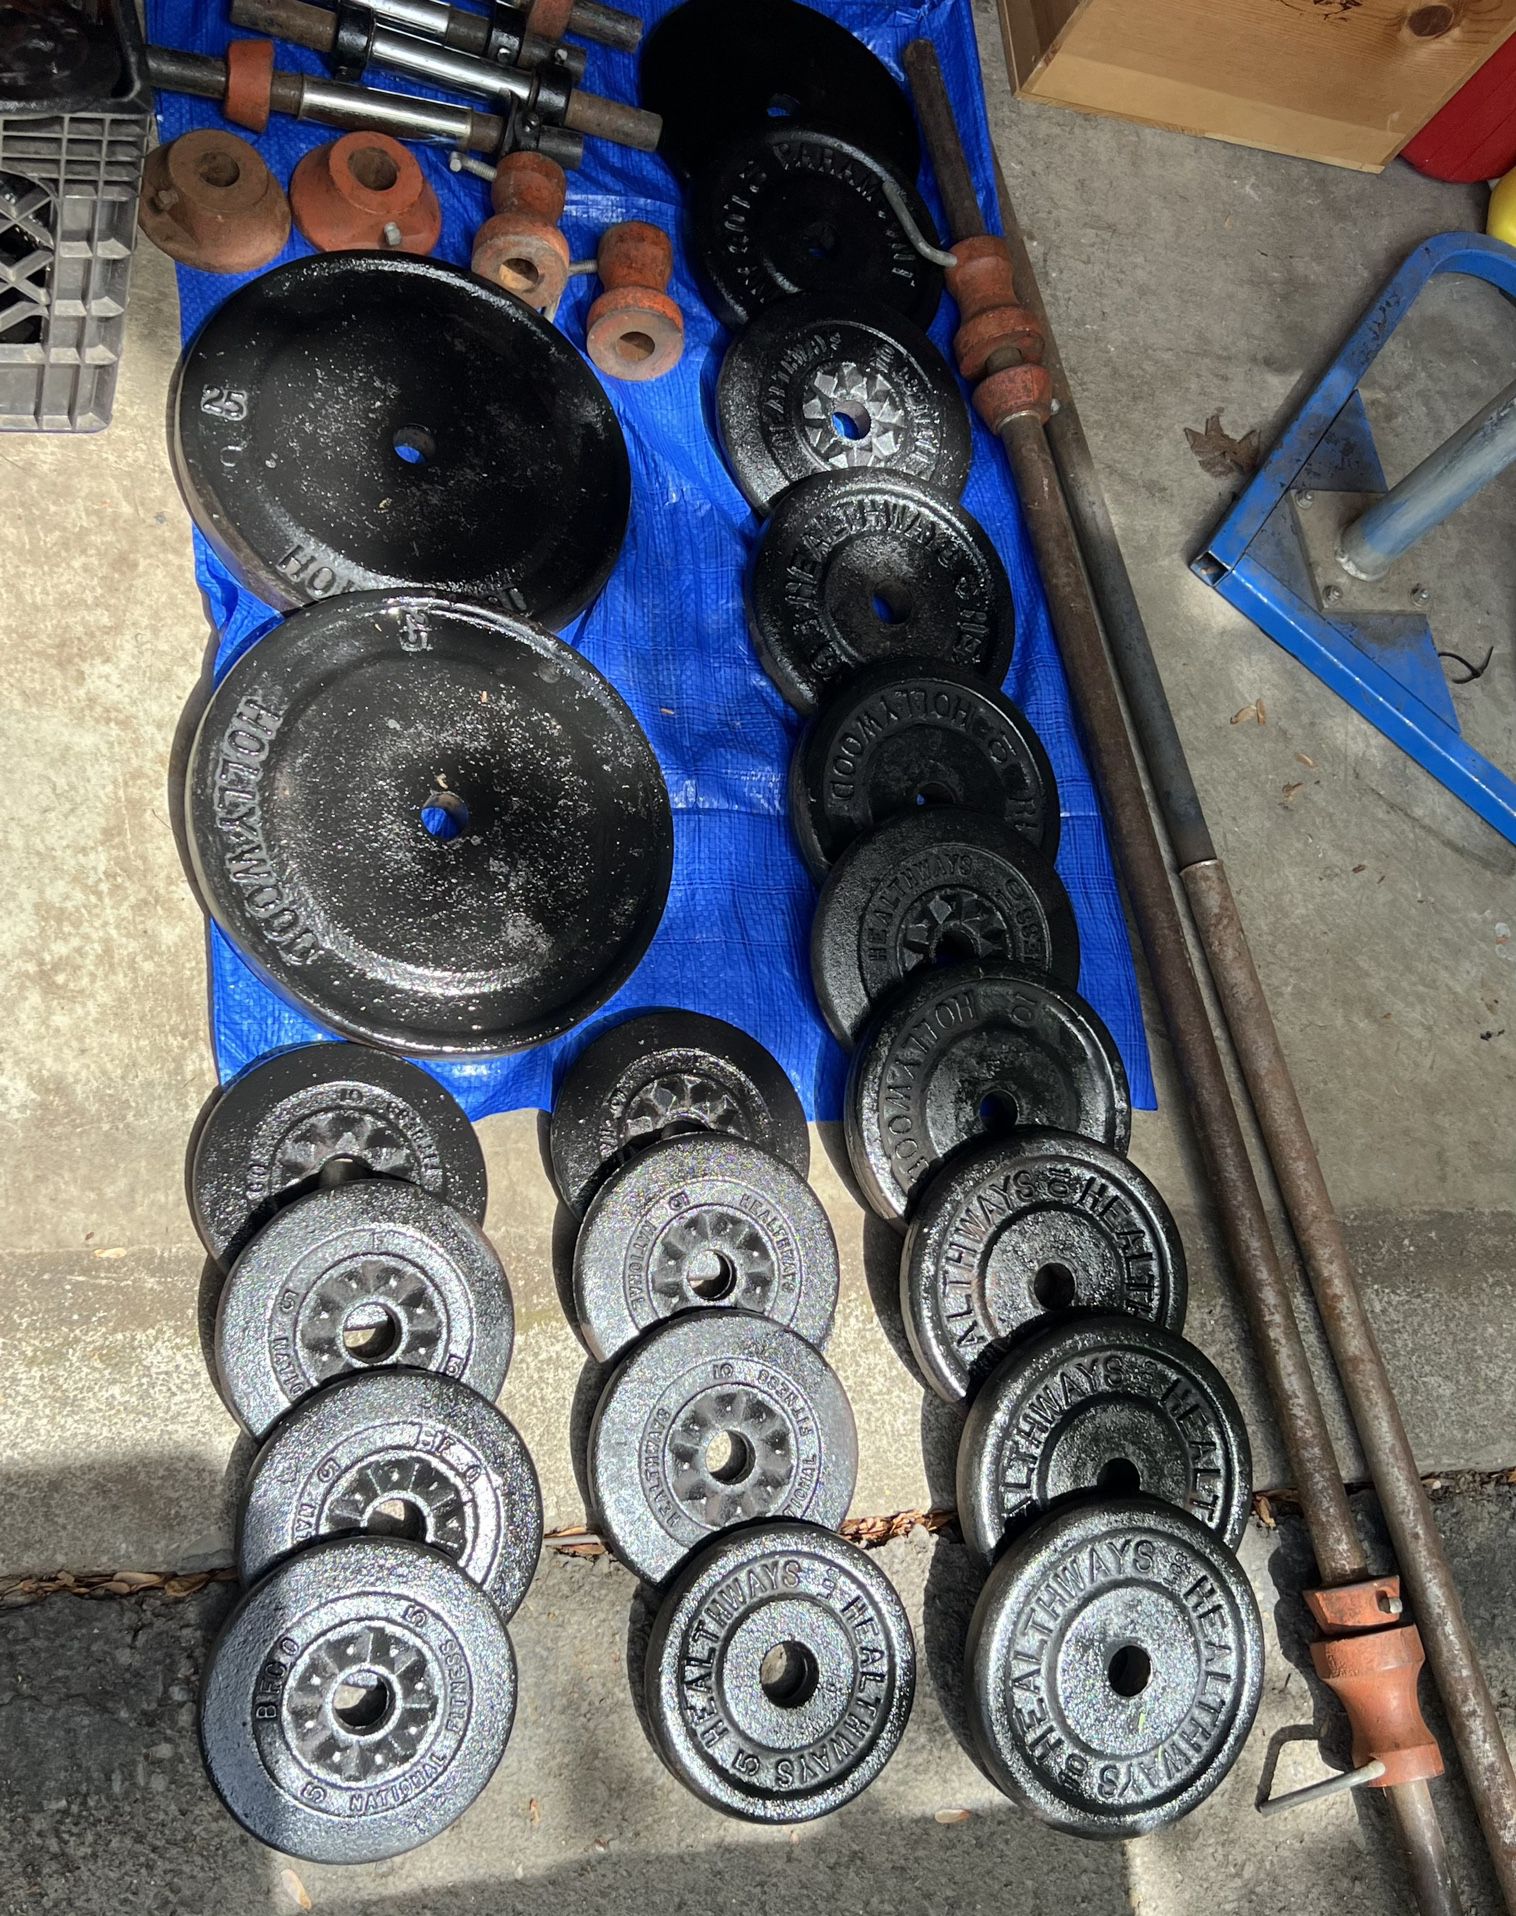 260 Pounds Steel Weights, dumbbells, barbells and more.